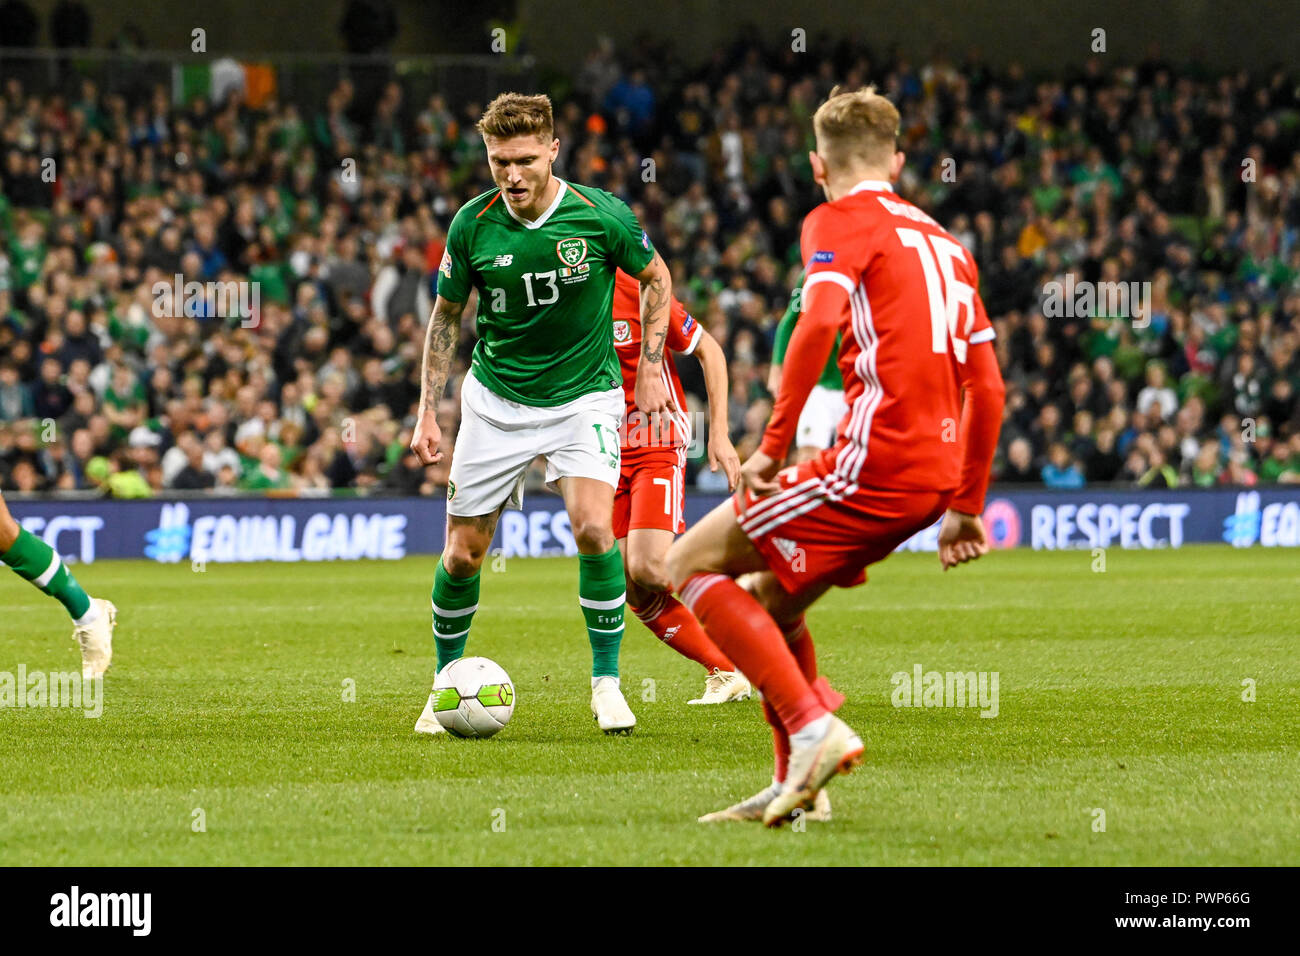 Dublin, Dublin, Ireland. 16th Oct, 2018. Jeff Hendrick seen in action during the Rep of Ireland vs Wales UEFA Nations League match at the Aviva Stadium.Final Score Ireland 0-1 Wales Credit: Ben Ryan/SOPA Images/ZUMA Wire/Alamy Live News Stock Photo